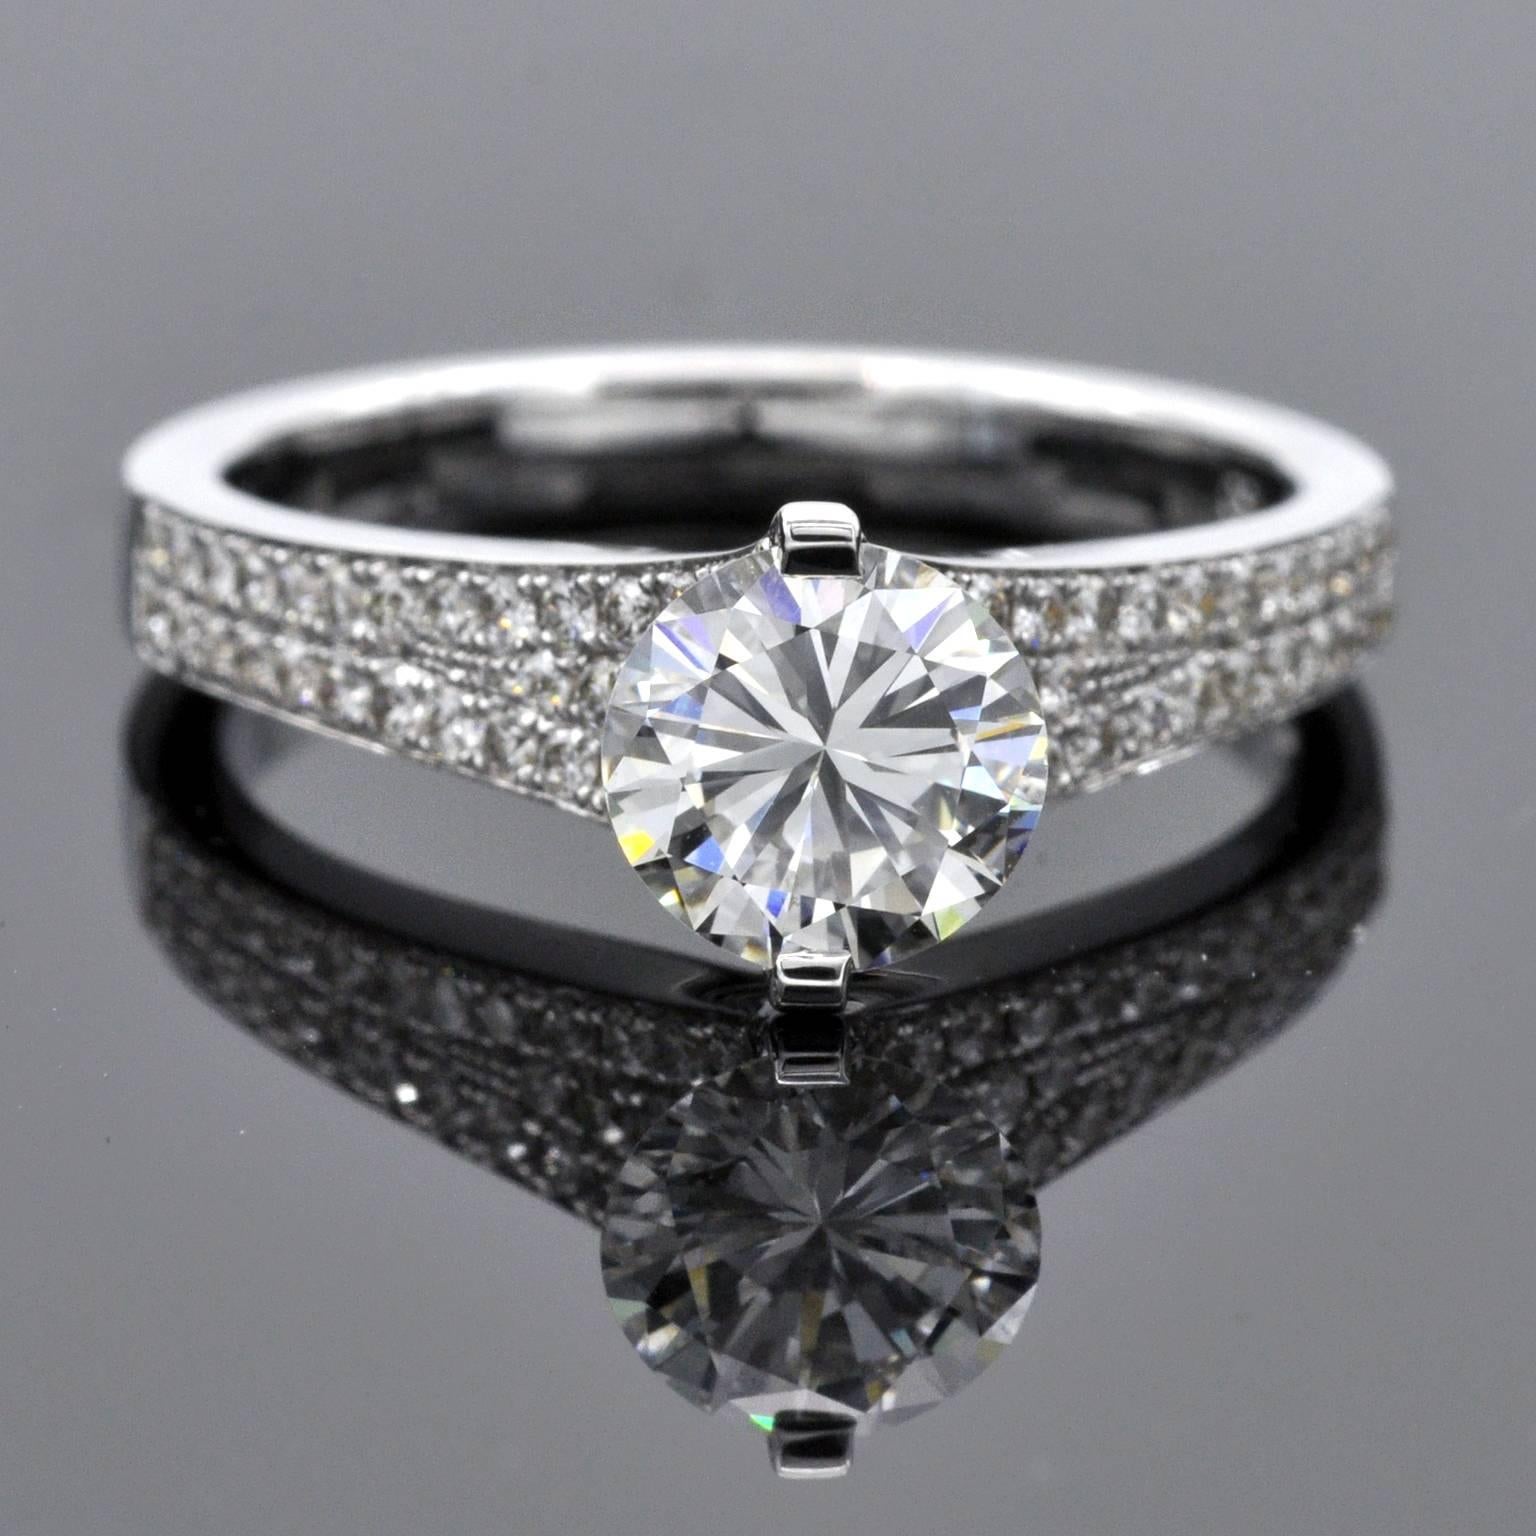 One of a kind engagement ring with a modern unique design. The diamond is set with two strong prongs that showcases it in a way that allows light in making the stone sparkle at its best. The band itself is set with 0,40 carat of brilliant cut